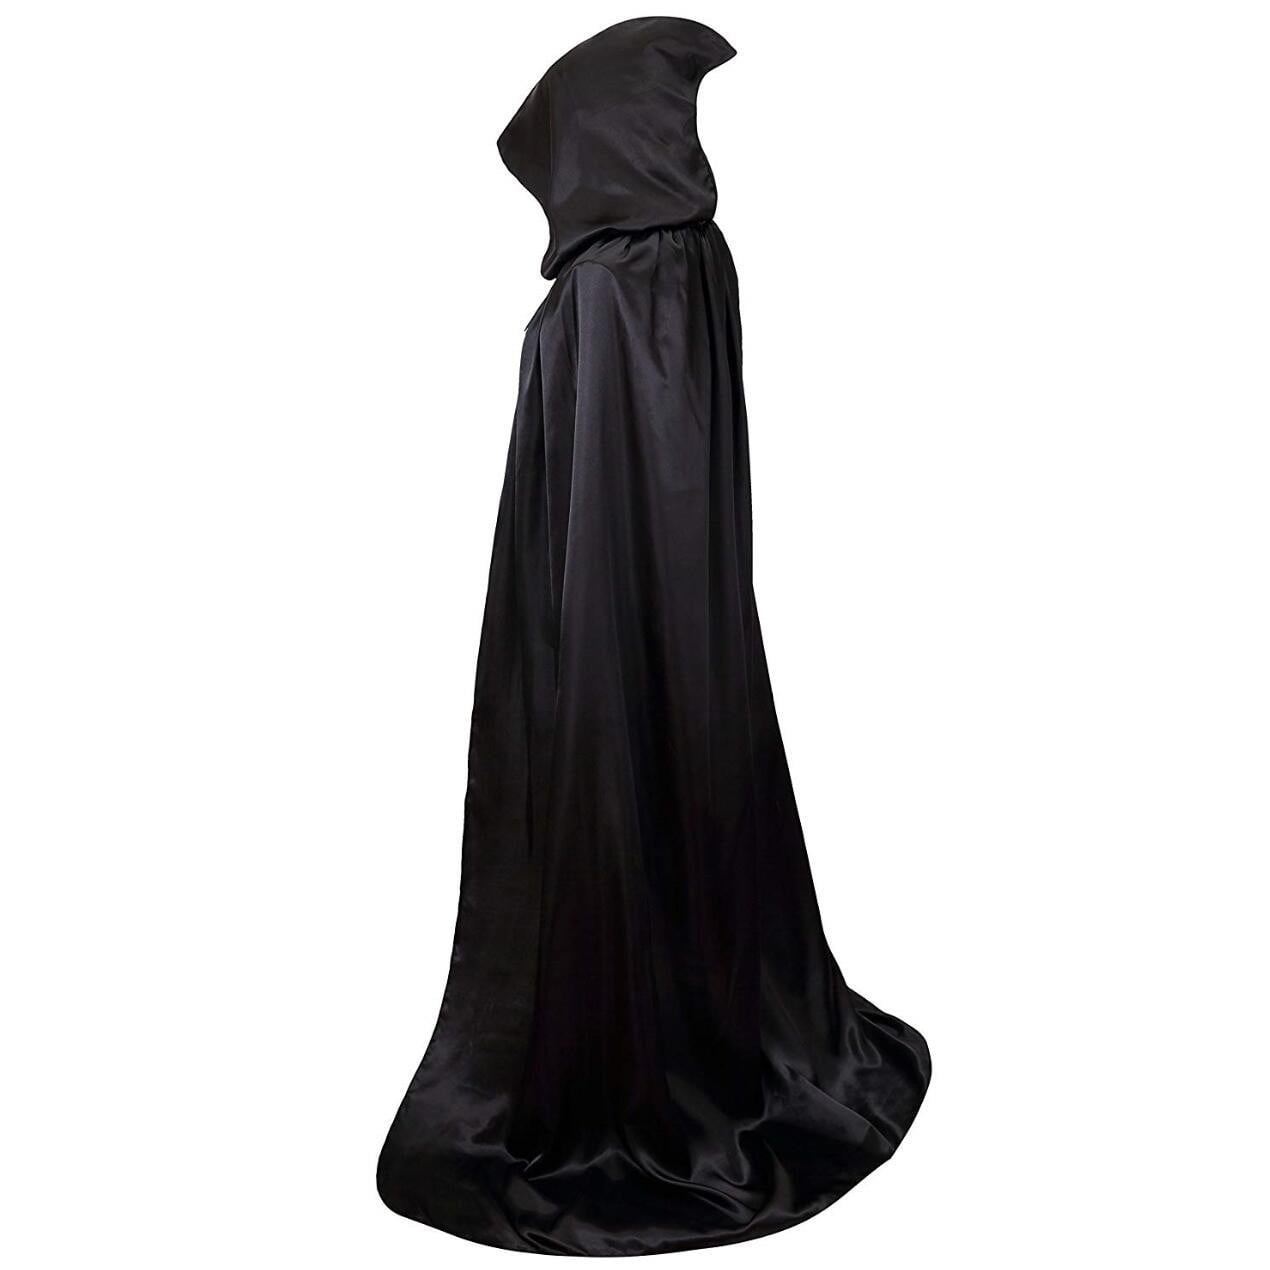 Costyle Adult Kids Hooded Cape Robe Cloak Vampire Witch Wizard ...